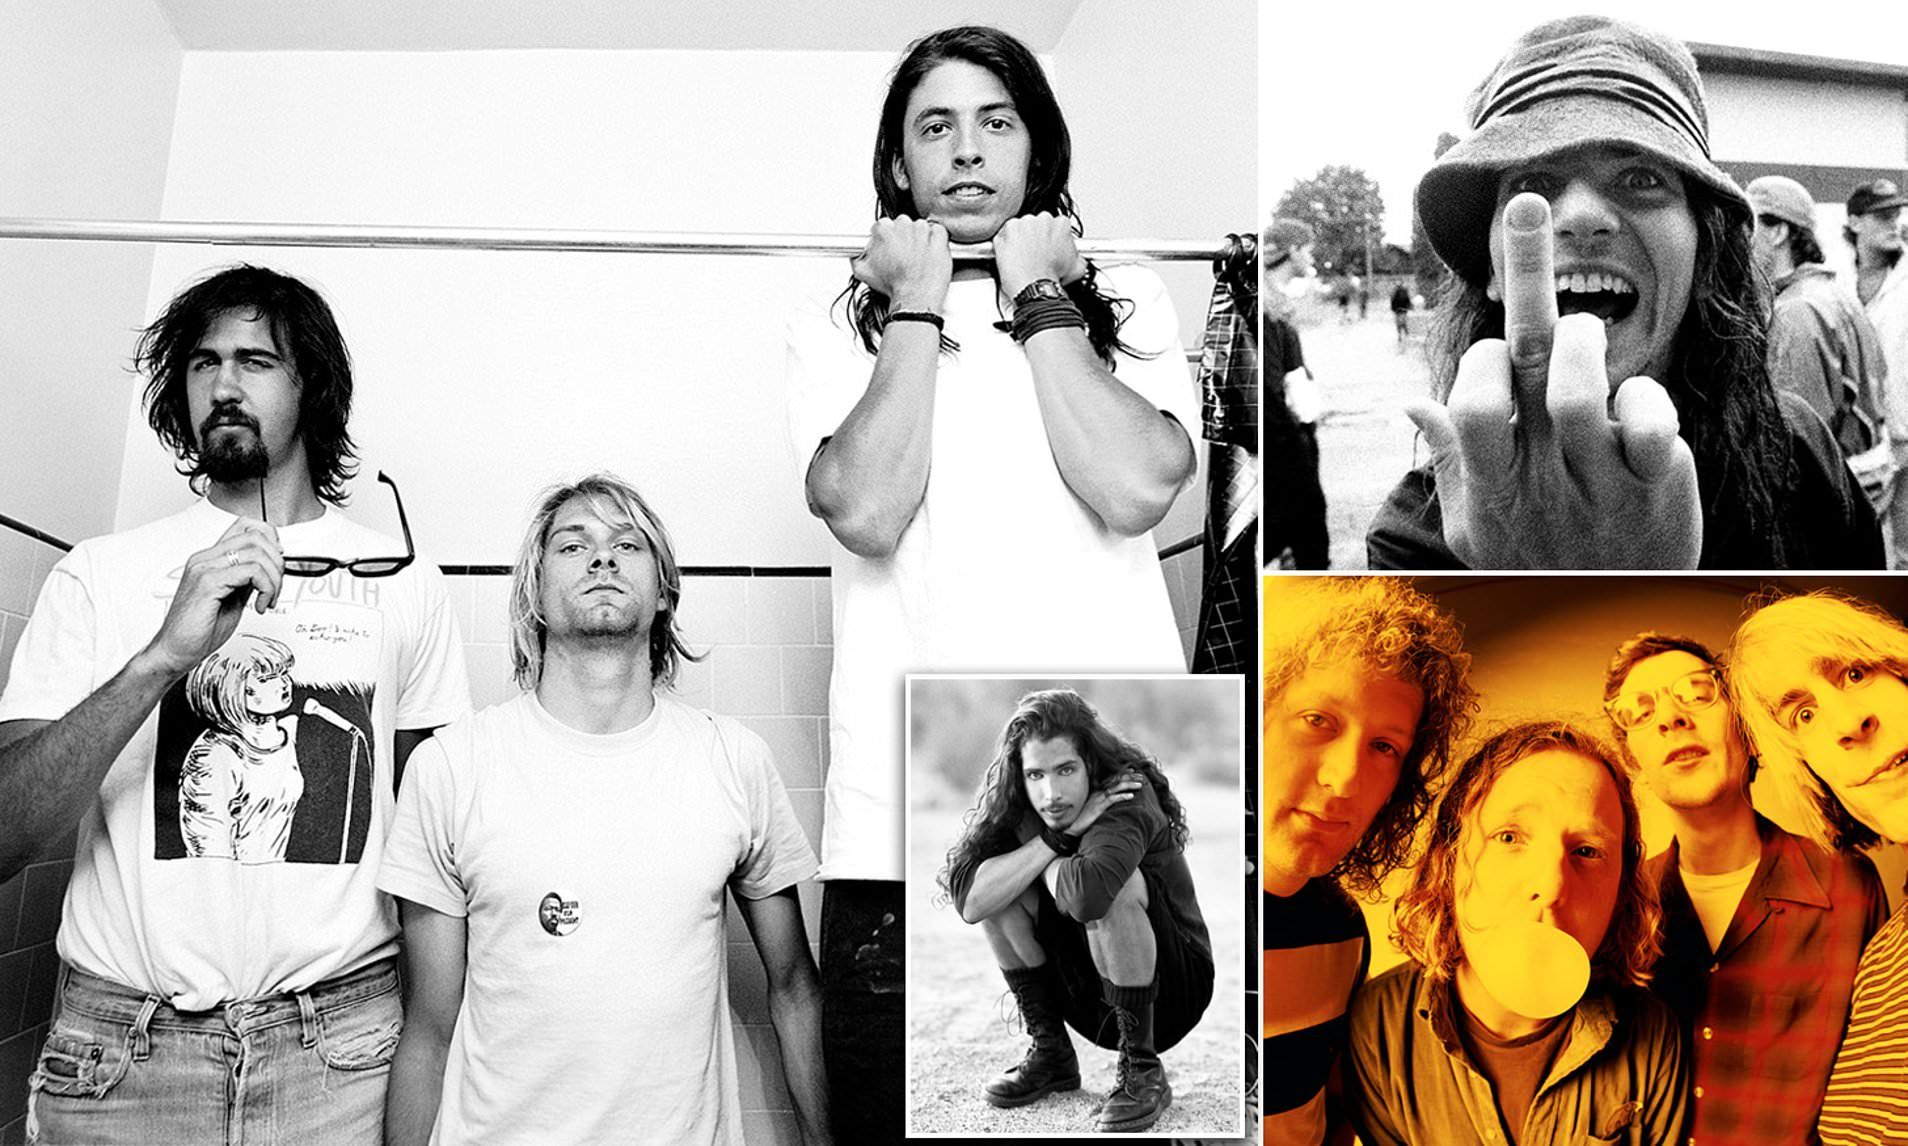 The gods of grunge: From Nirvana and Pearl Jam to Soundgarden